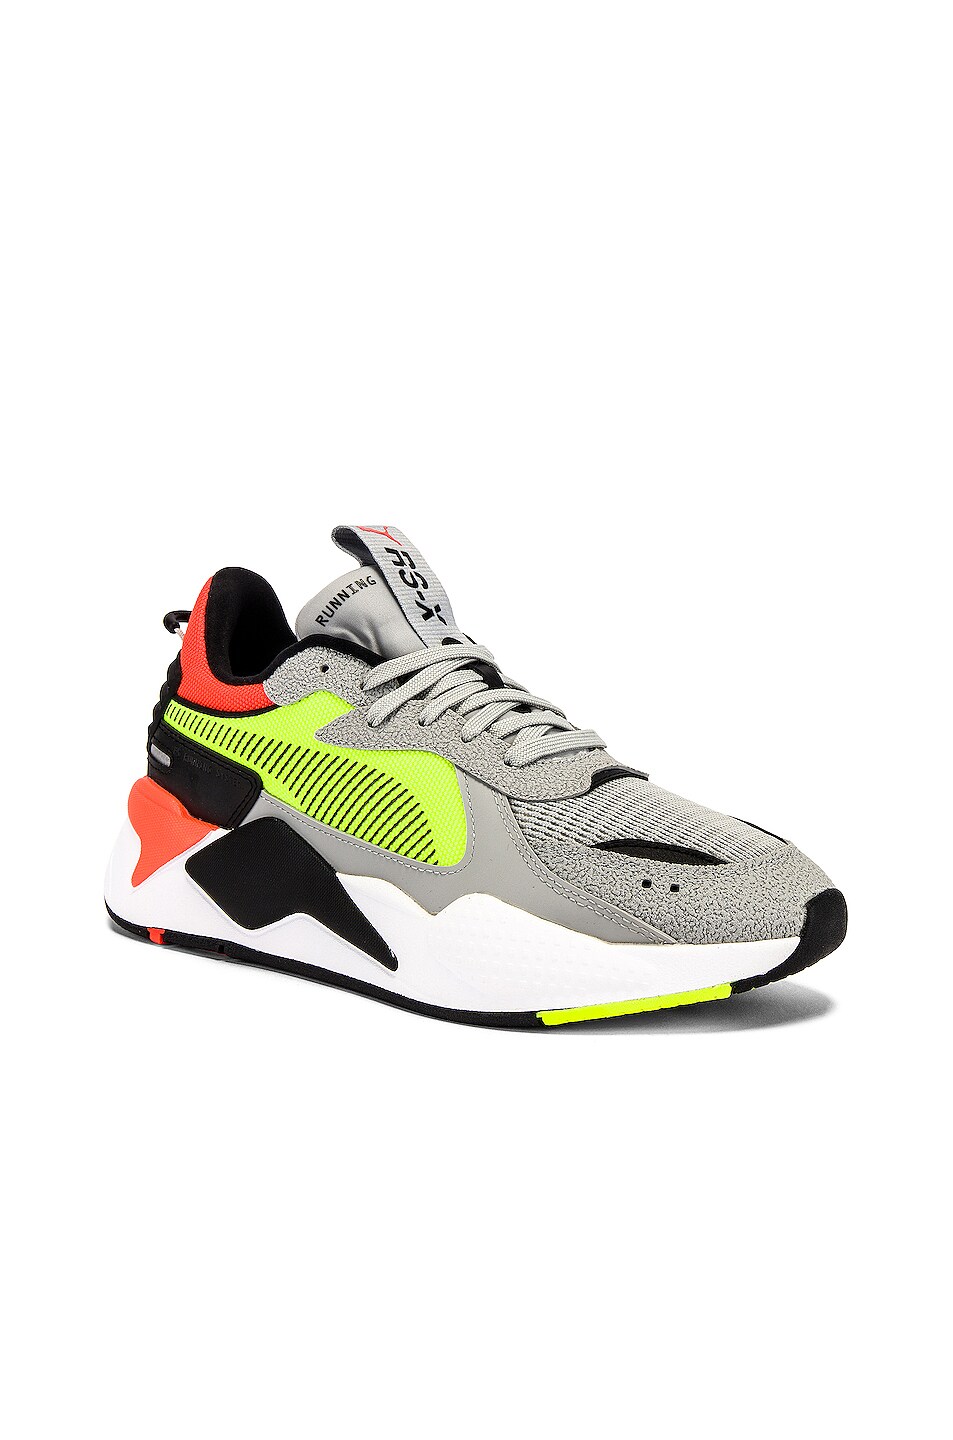 Image 1 of Puma Select RS-X Hard Drive in High Rise & Yellow Alert